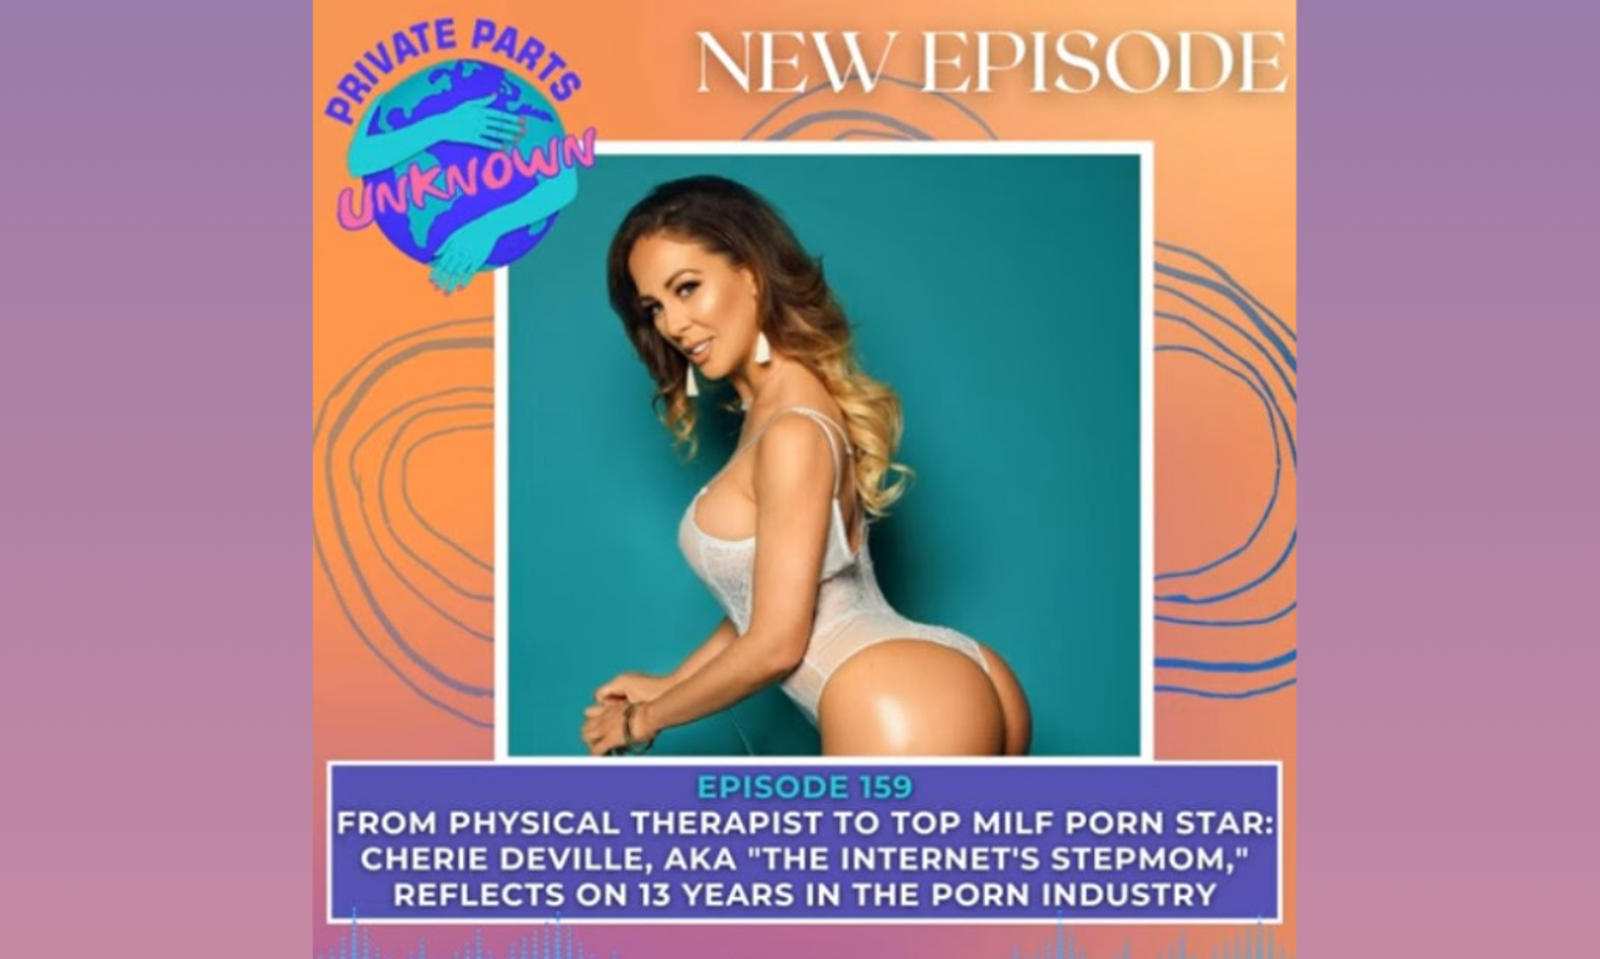 Cherie DeVille Guests on 'Private Parts Unknown' Podcast